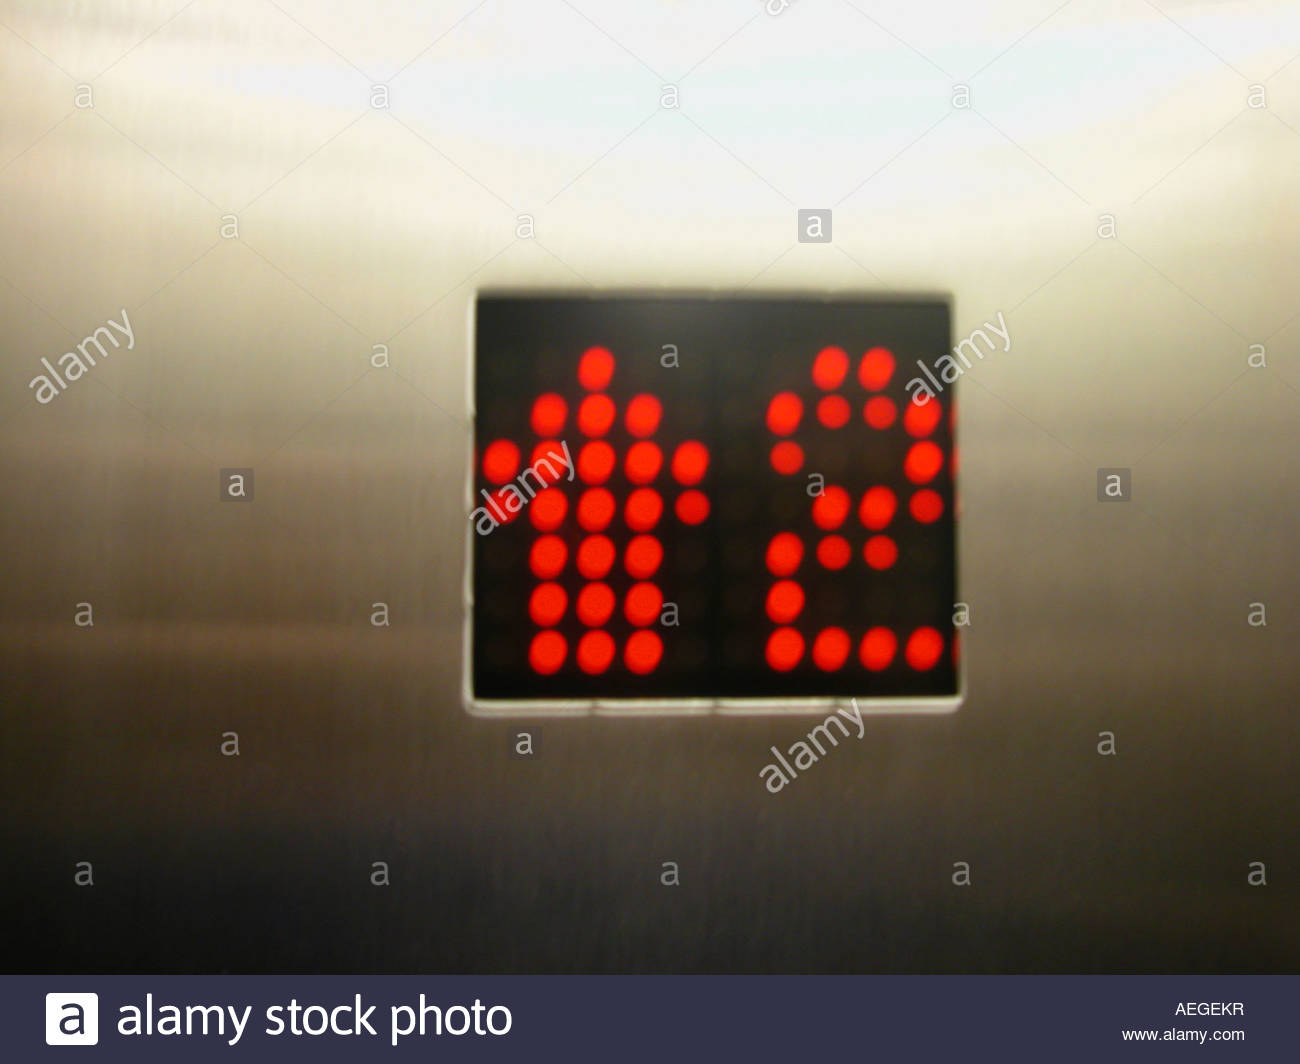 2nd Floor Indicator For A Lift Elevator Stock Photo 13677898